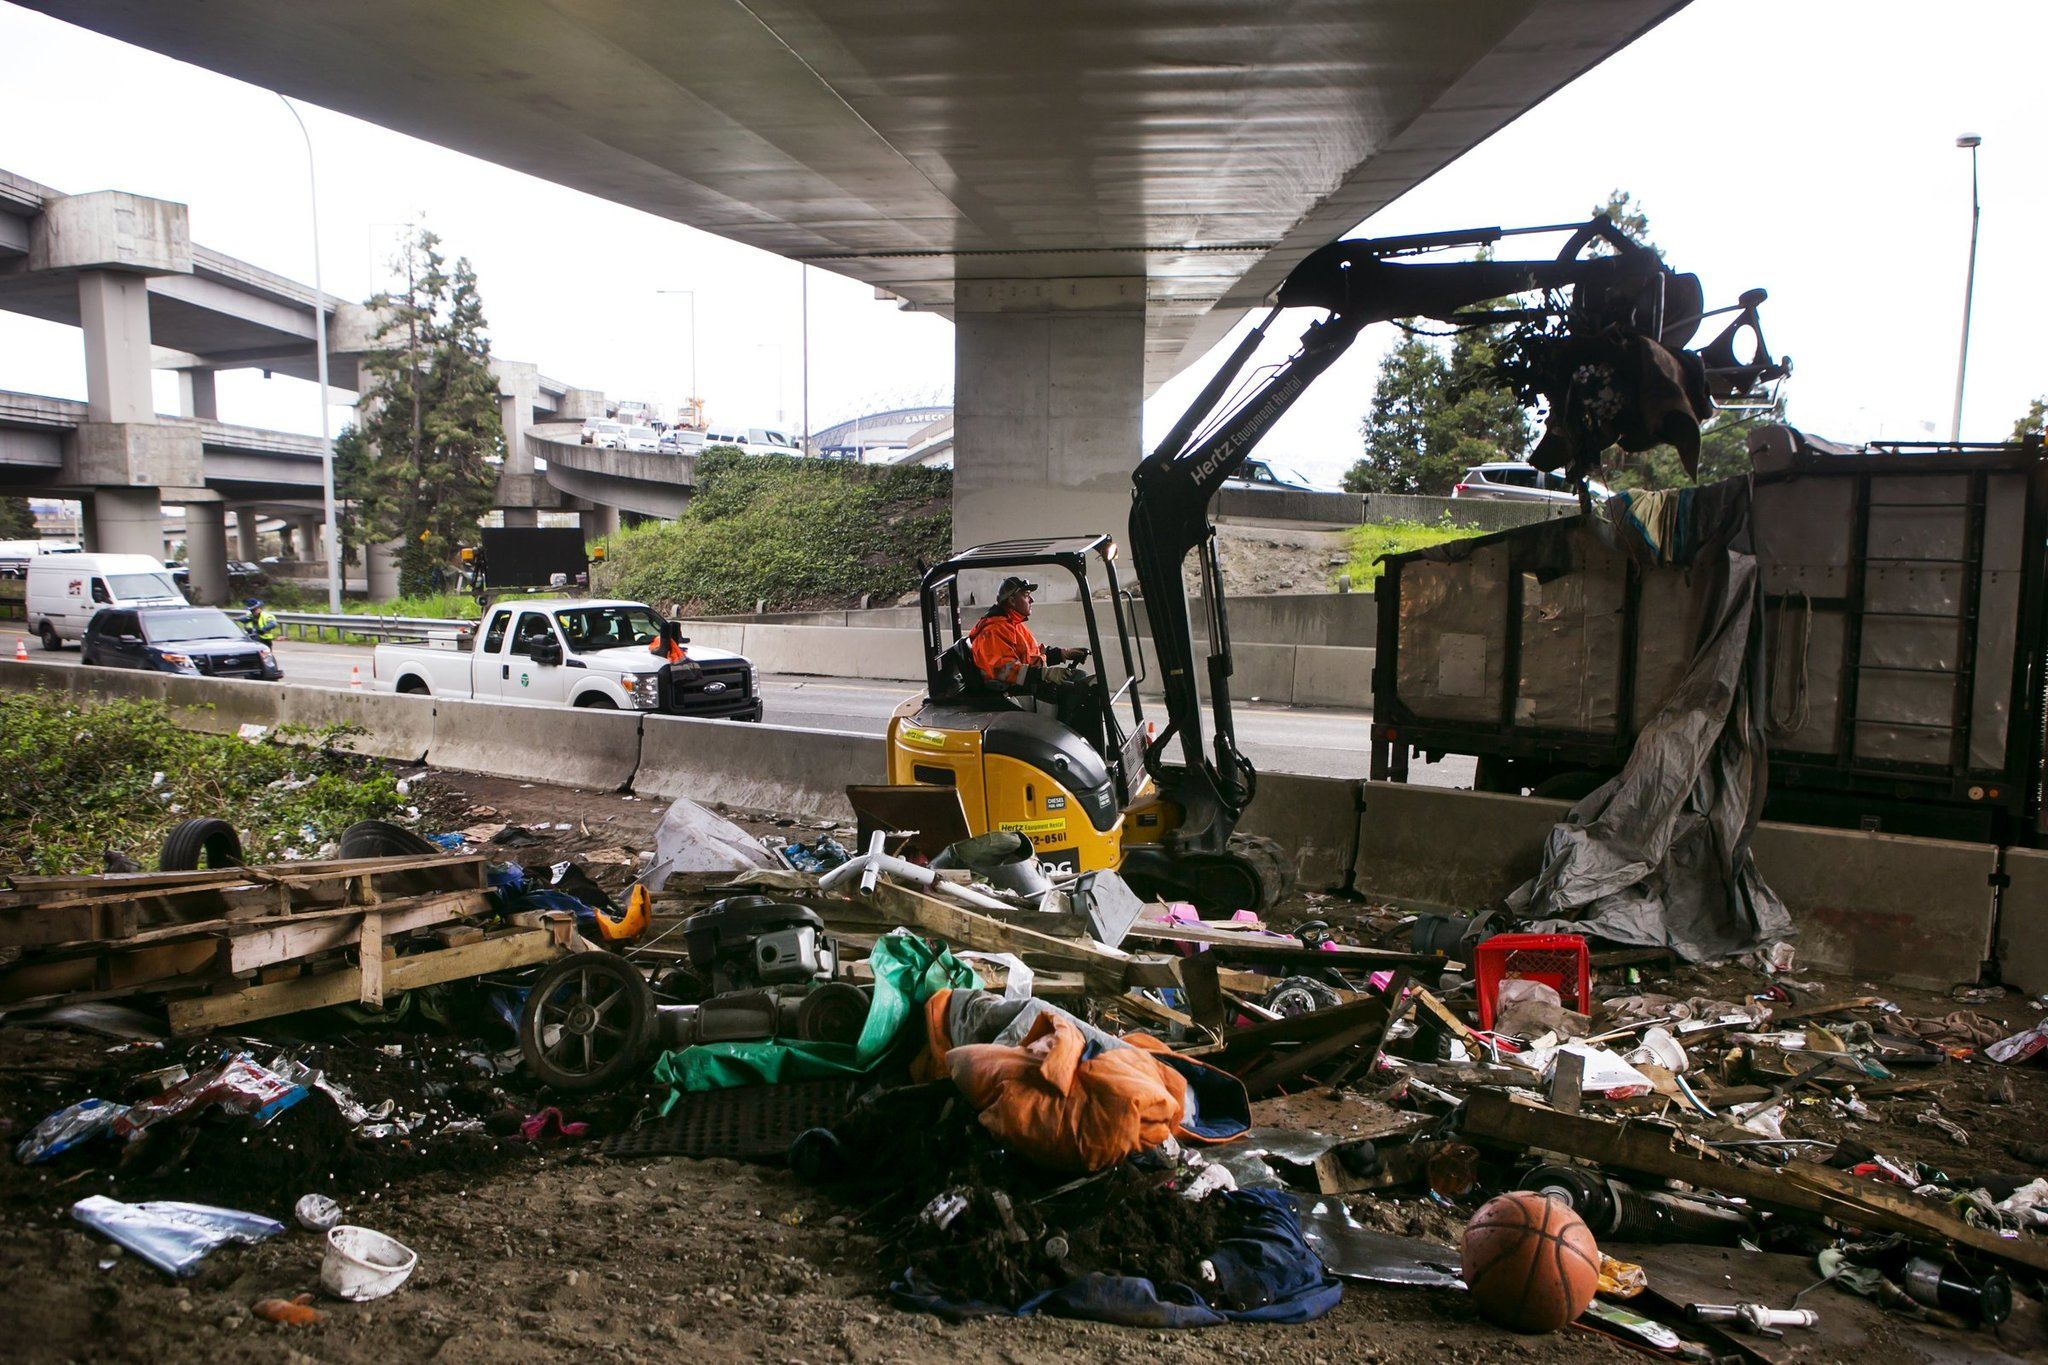 Judge: Clark County liable for clearing out homeless camps